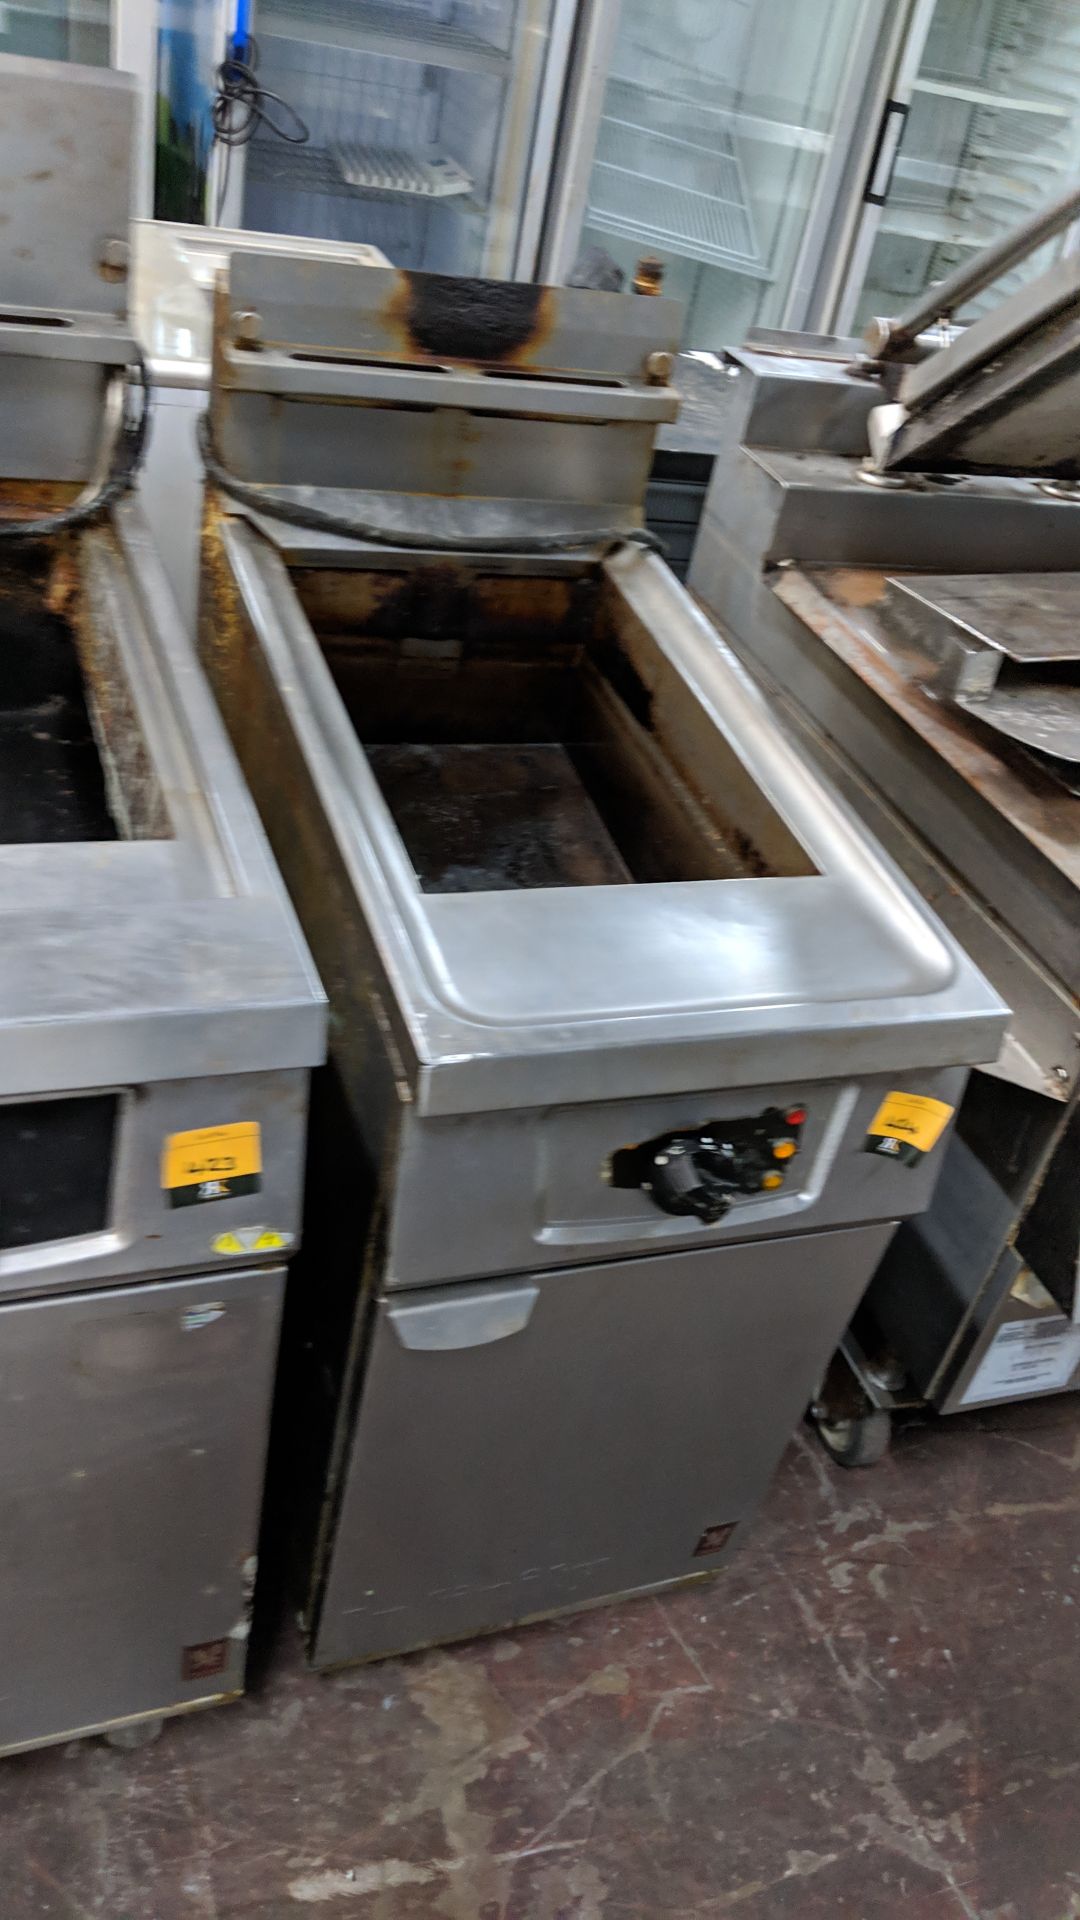 Falcon stainless steel floorstanding fryer IMPORTANT: Please remember goods successfully bid upon